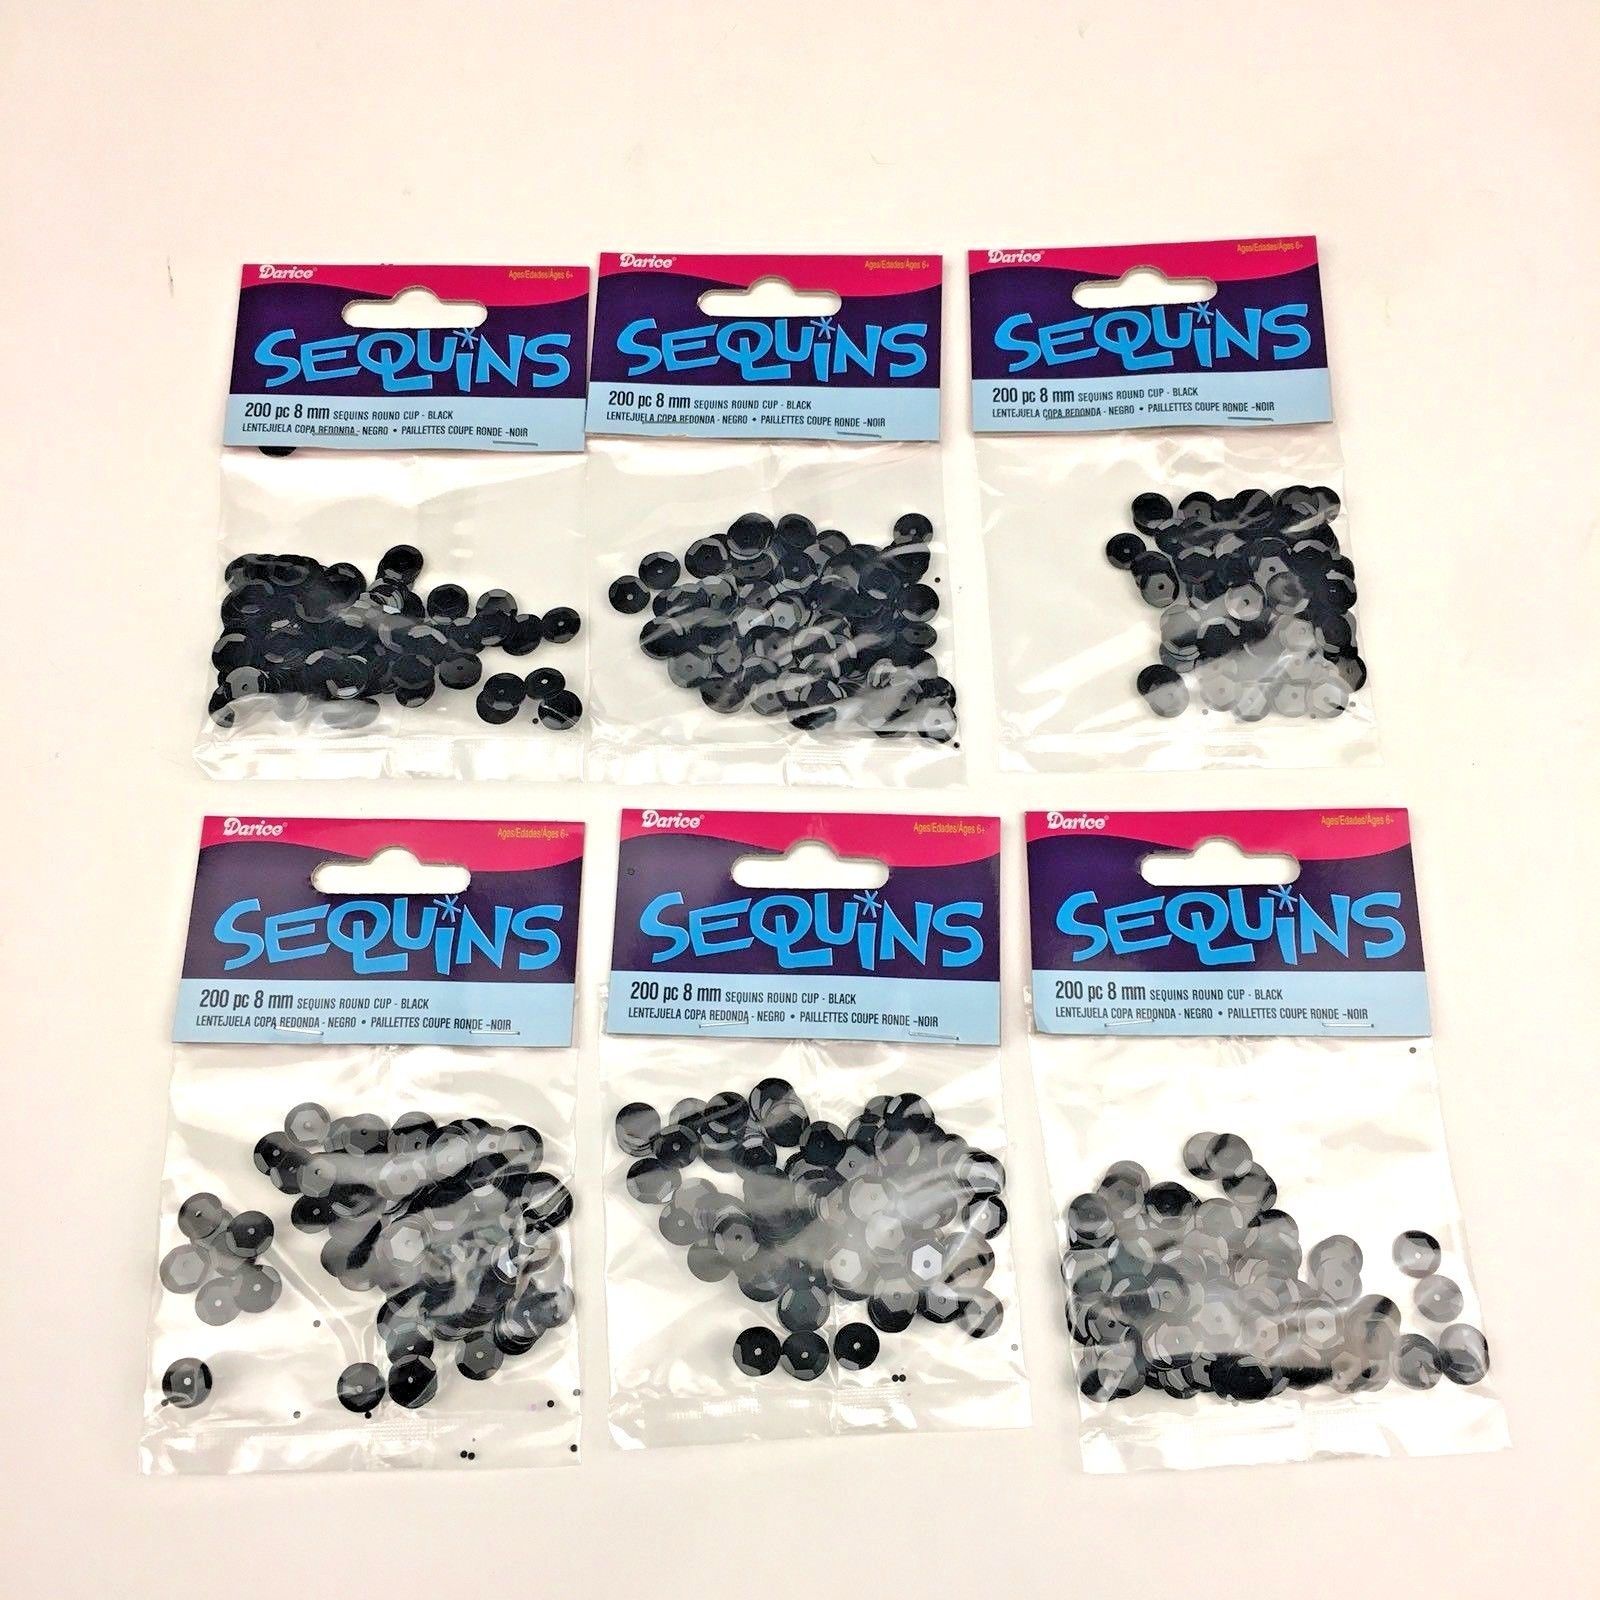 Darice Black Sequins Round Cup 200 pc each 8mm 6 Packs Art Crafting Supply - $14.01